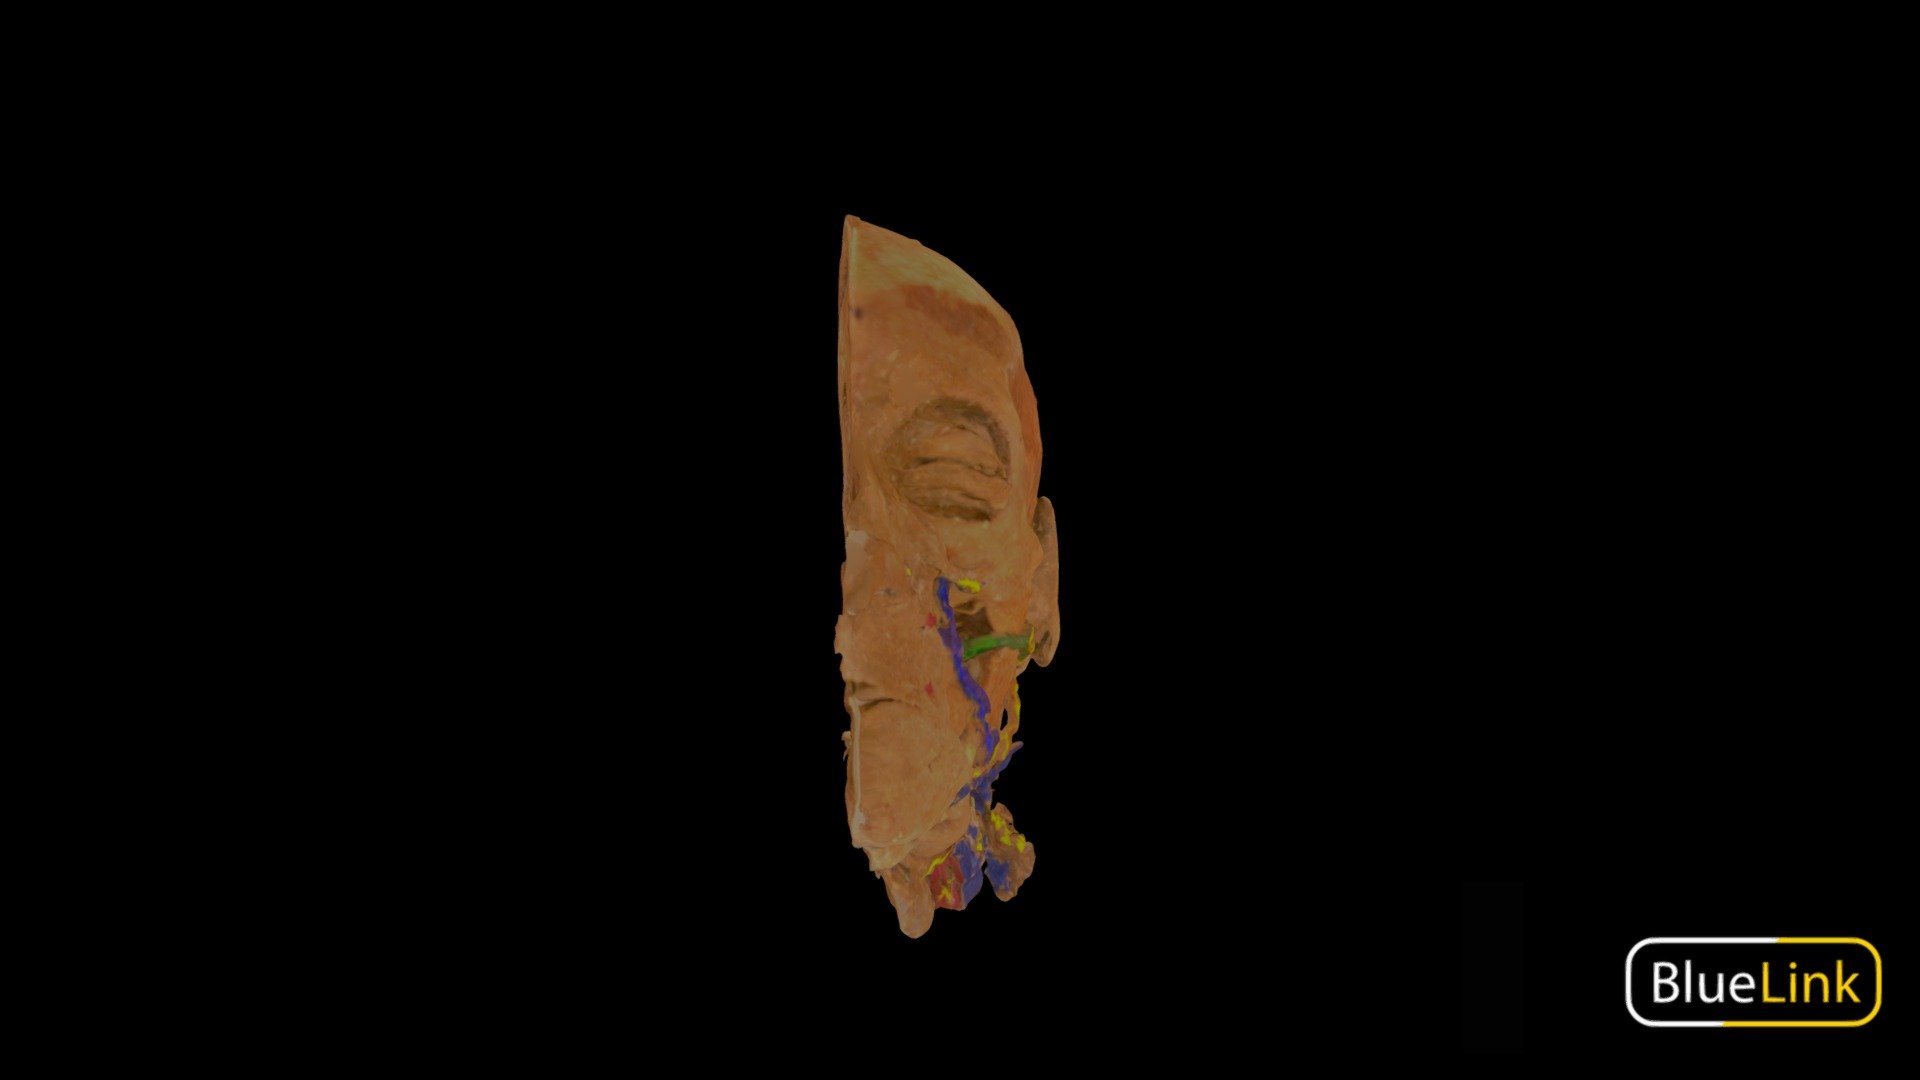 3D scan of a hemisected human head
Captured with EinScan Pro
University of Michigan
Captured and edited by: Cristina Prall &amp; Will Gribbin
31913-H02 - Muscles of Mastication - 3D model by Bluelink Anatomy - University of Michigan (@bluelinkanatomy) 3d model